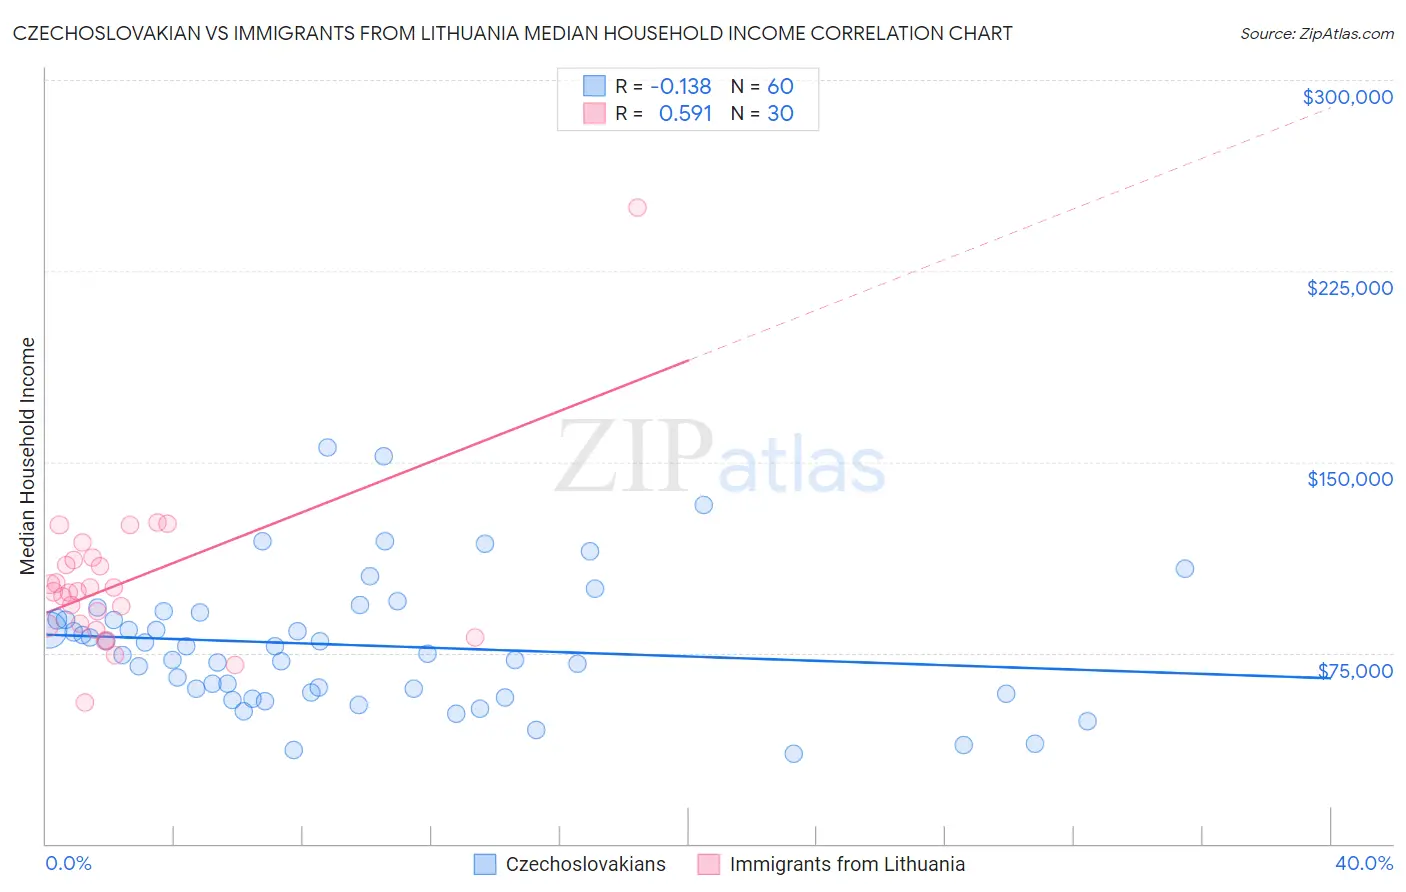 Czechoslovakian vs Immigrants from Lithuania Median Household Income